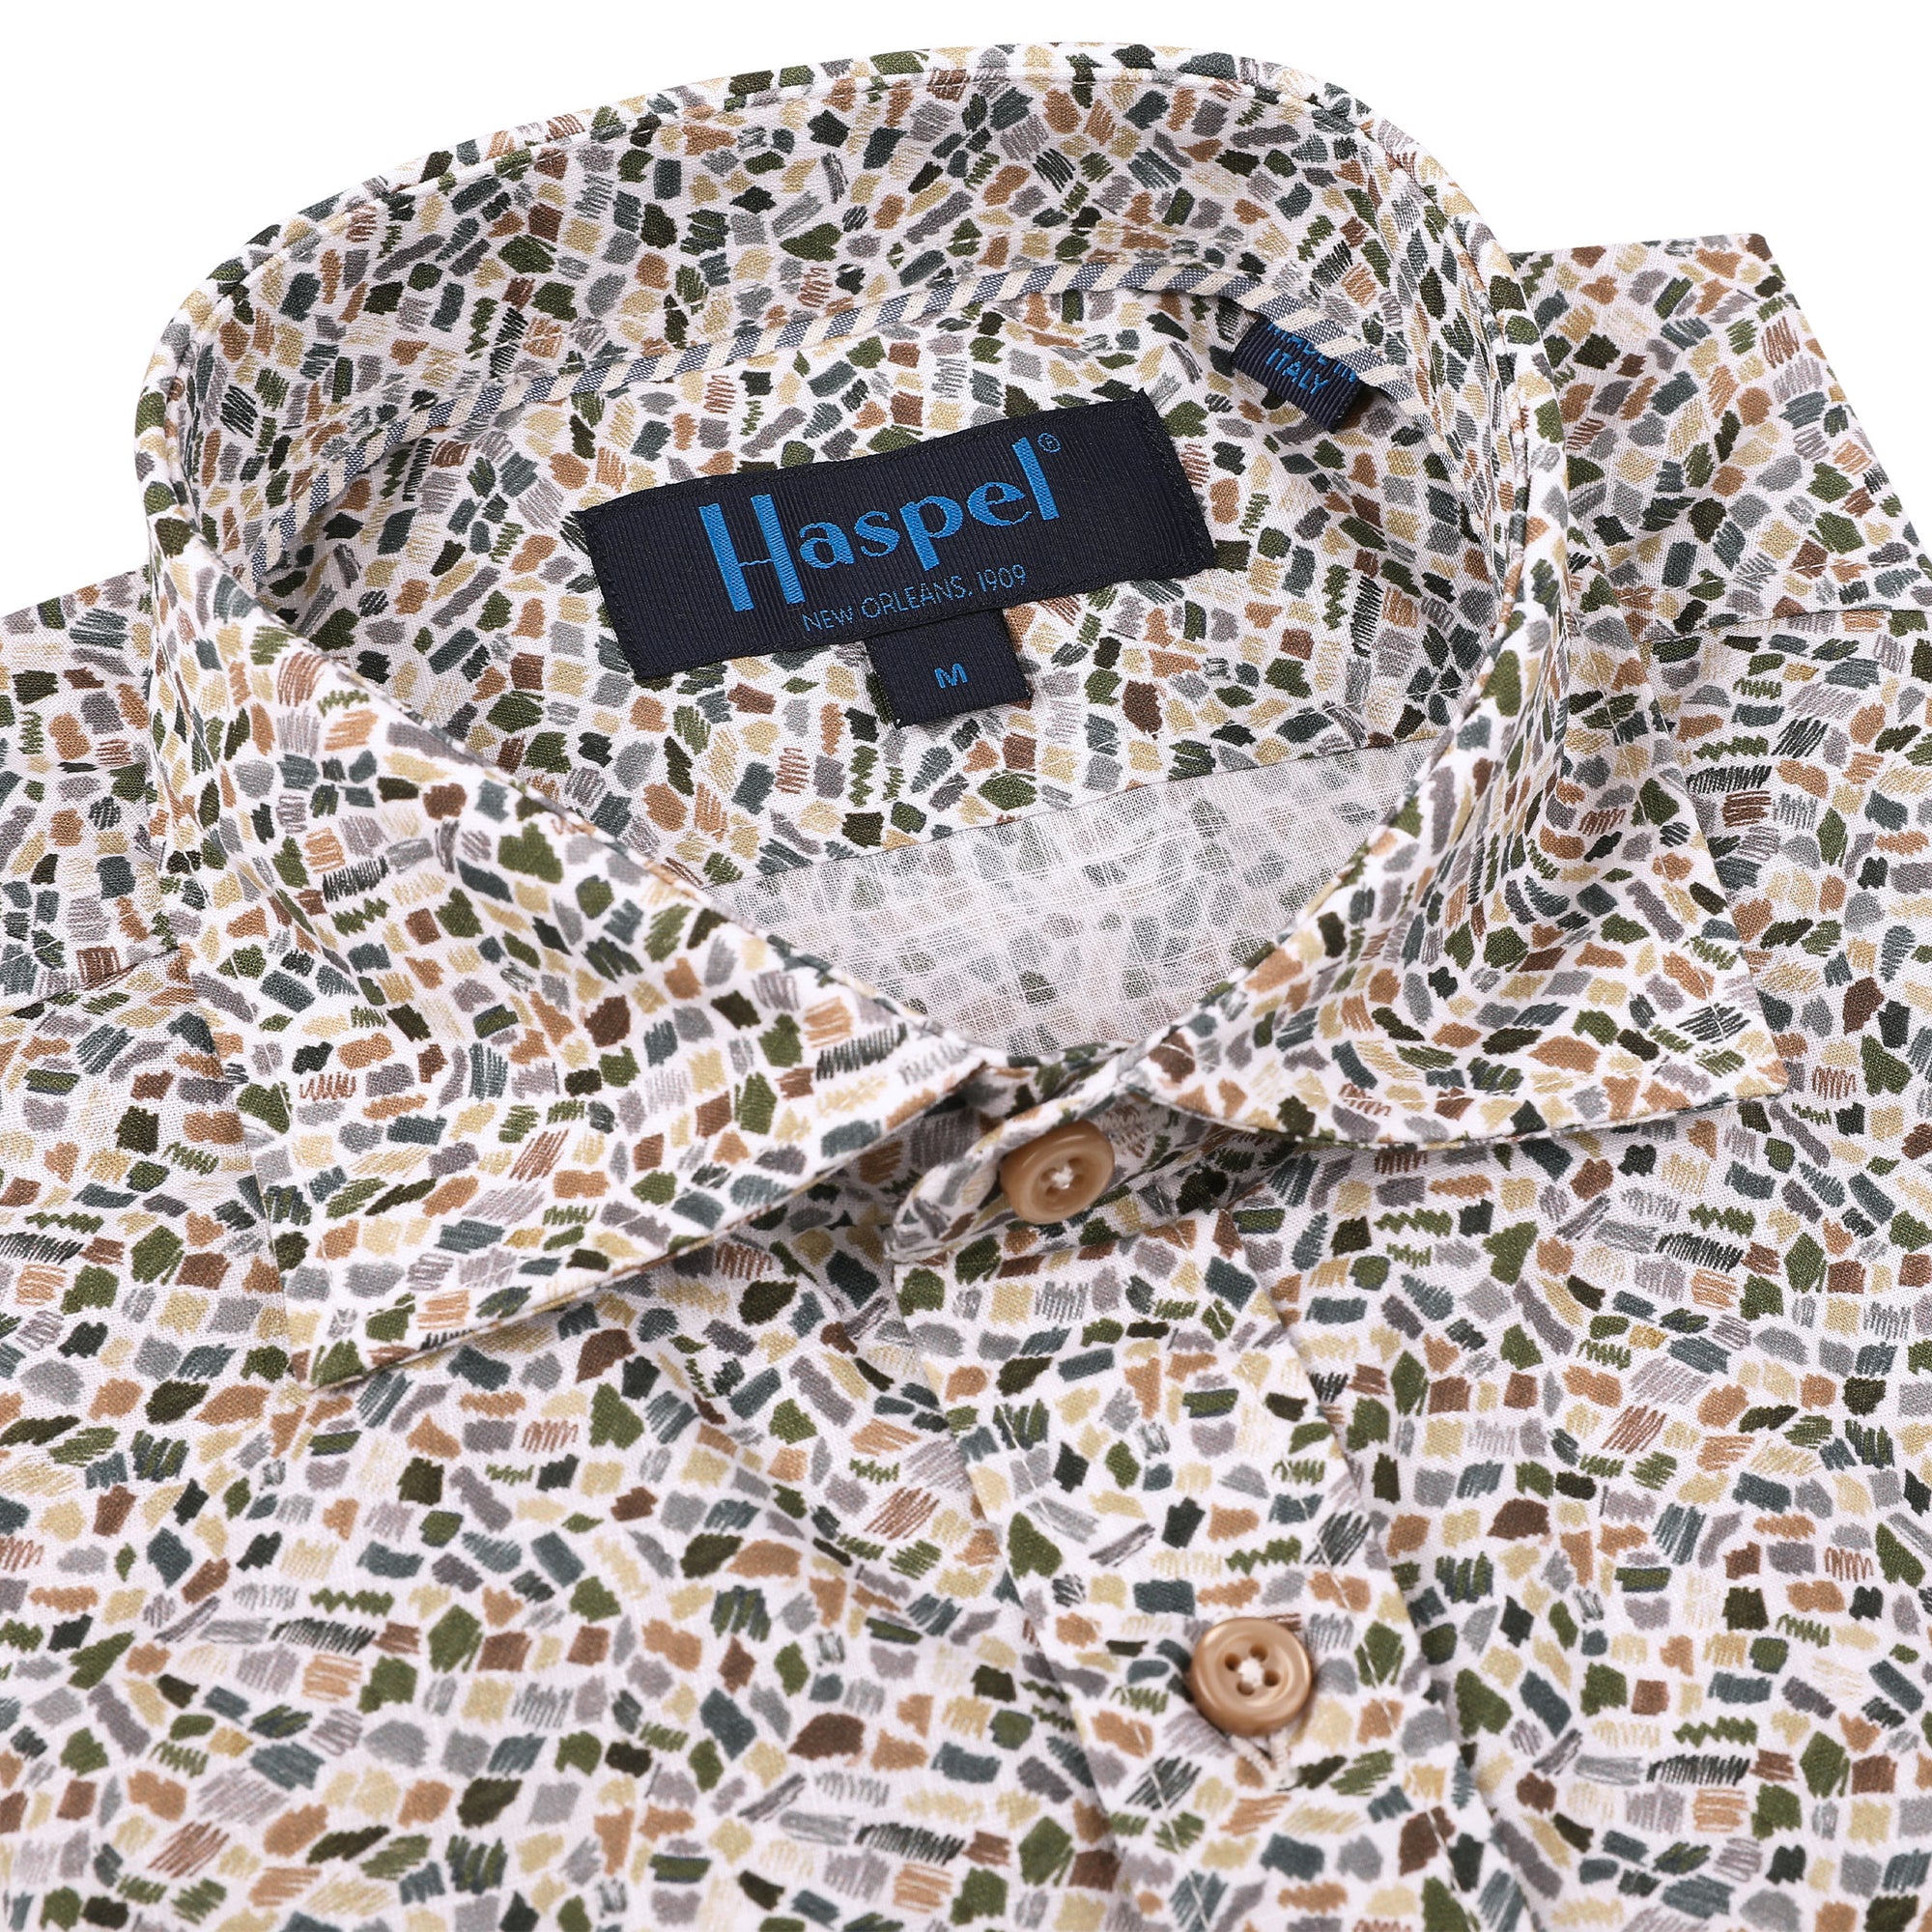 This striking Carroll Olive & Tan Print adds a sophisticated touch to any wardrobe. The olive and tan mosaic print is offset with tan buttons to create an eye-catching look, perfect for a night in New Orleans or wherever your good times take you!  100% Cotton • Spread Collar • Long Sleeve • Machine Washable • Made in Italy • Return Policy